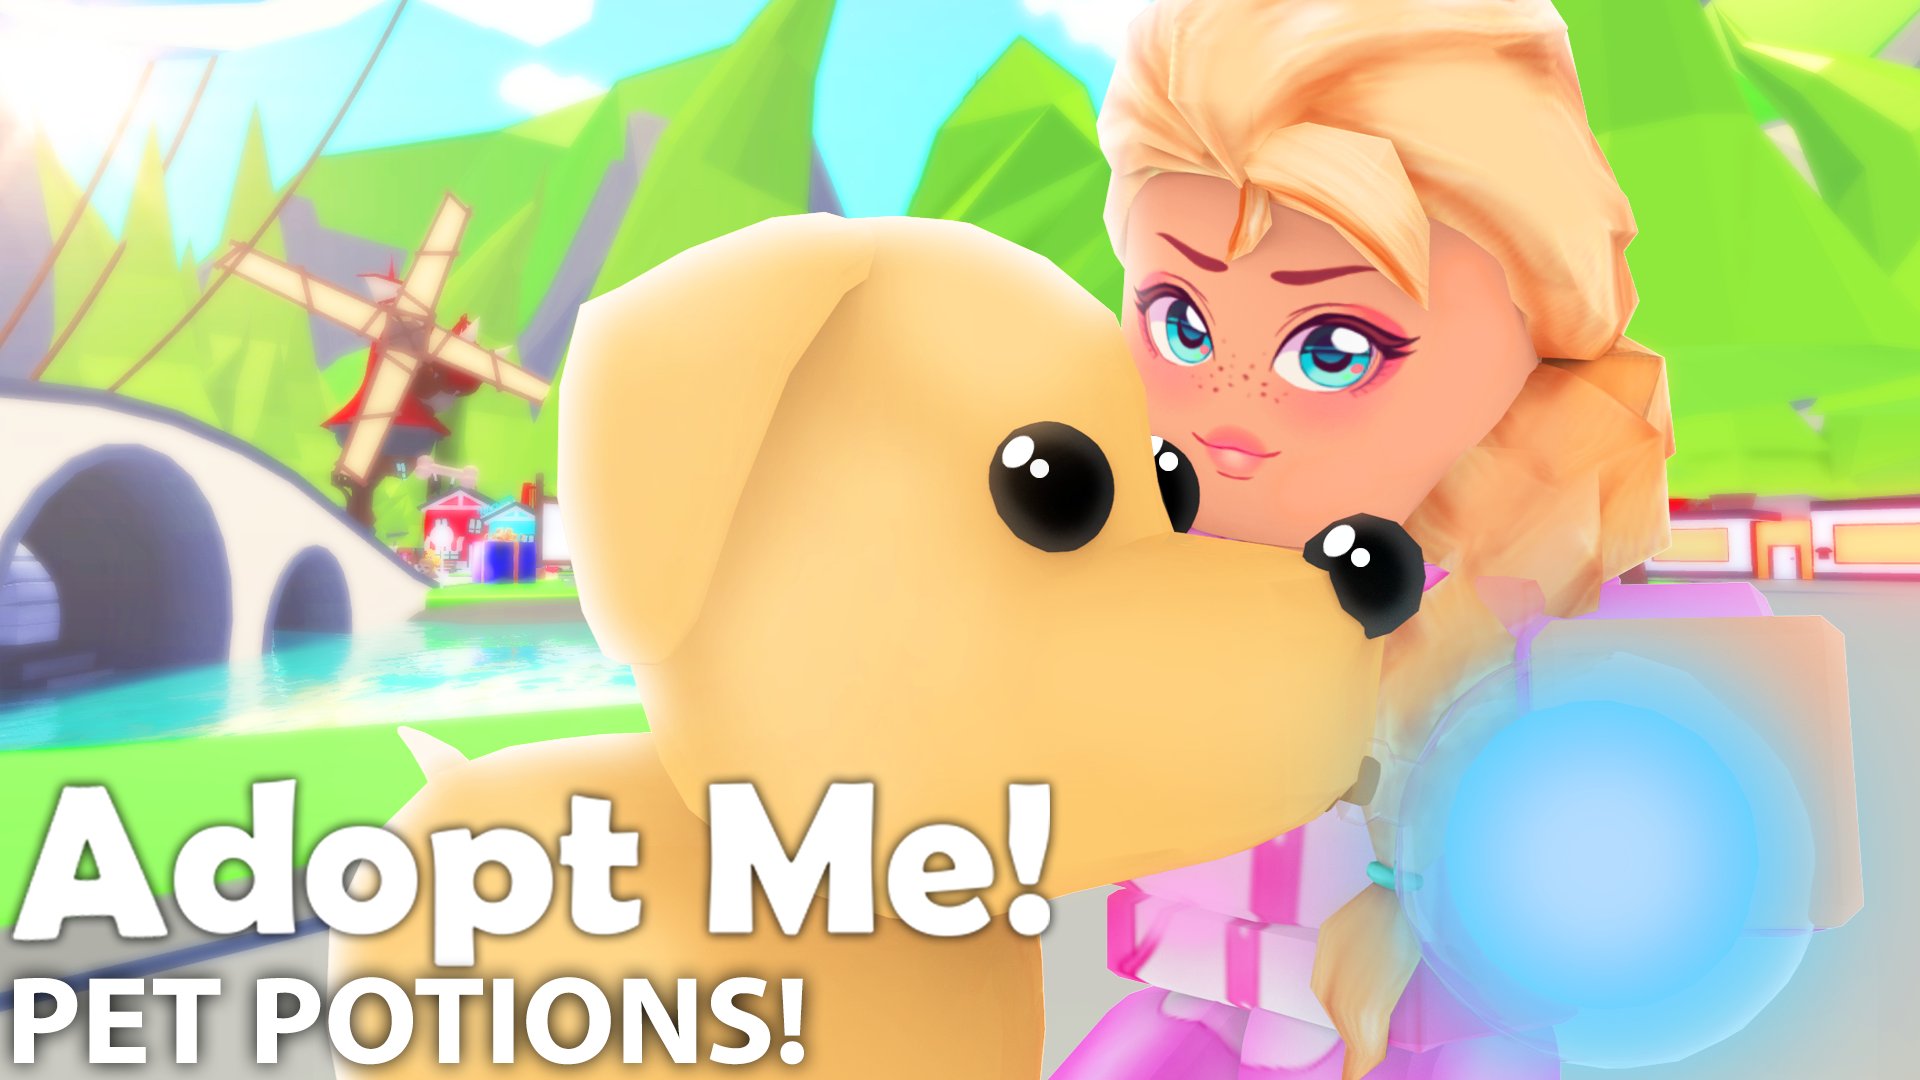 Adopt Me On Twitter New Pet Potions Feed Your Pets - adopt me animals on roblox